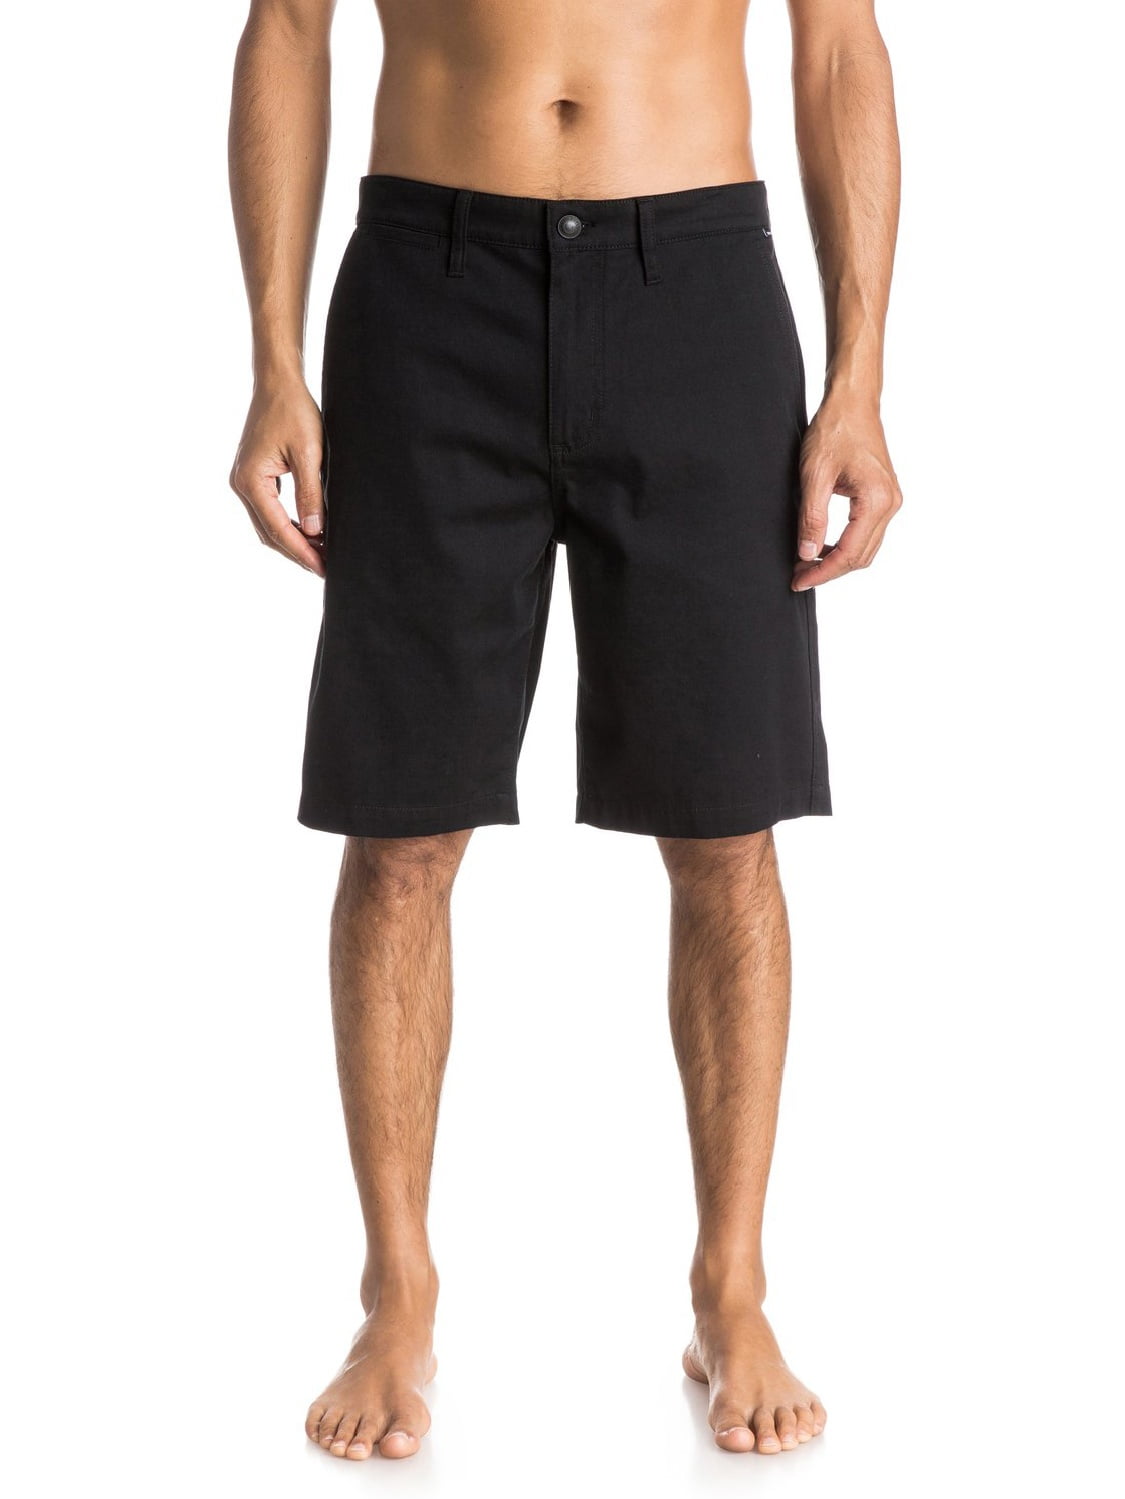 Everyday Shorts Union Stretch - Quiksilver Mens Black Casual